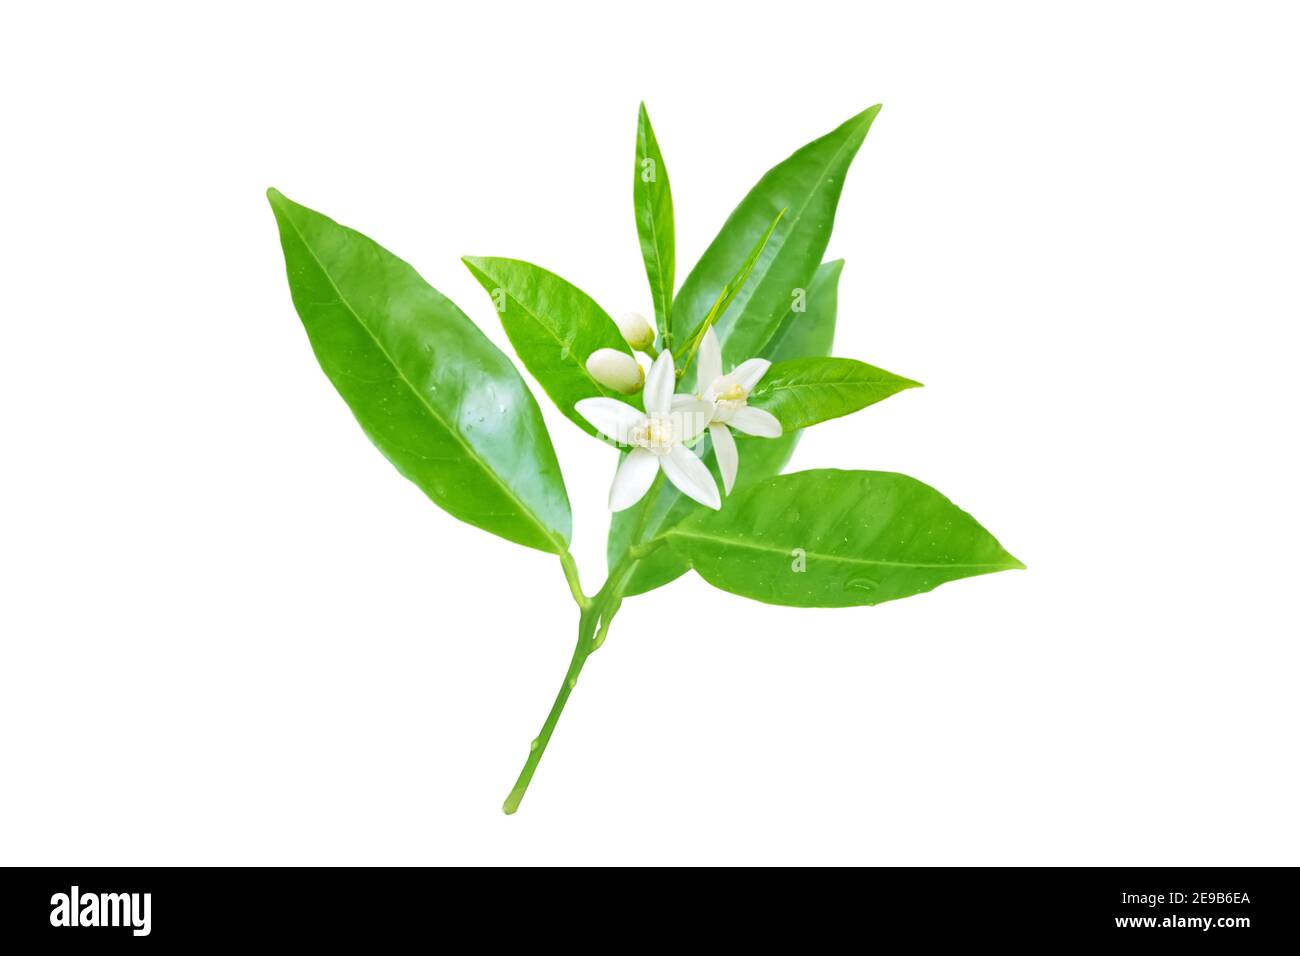 Neroli in bloom. Orange tree branch with white fragrant flowers, buds and leaves isolated on white. Stock Photo